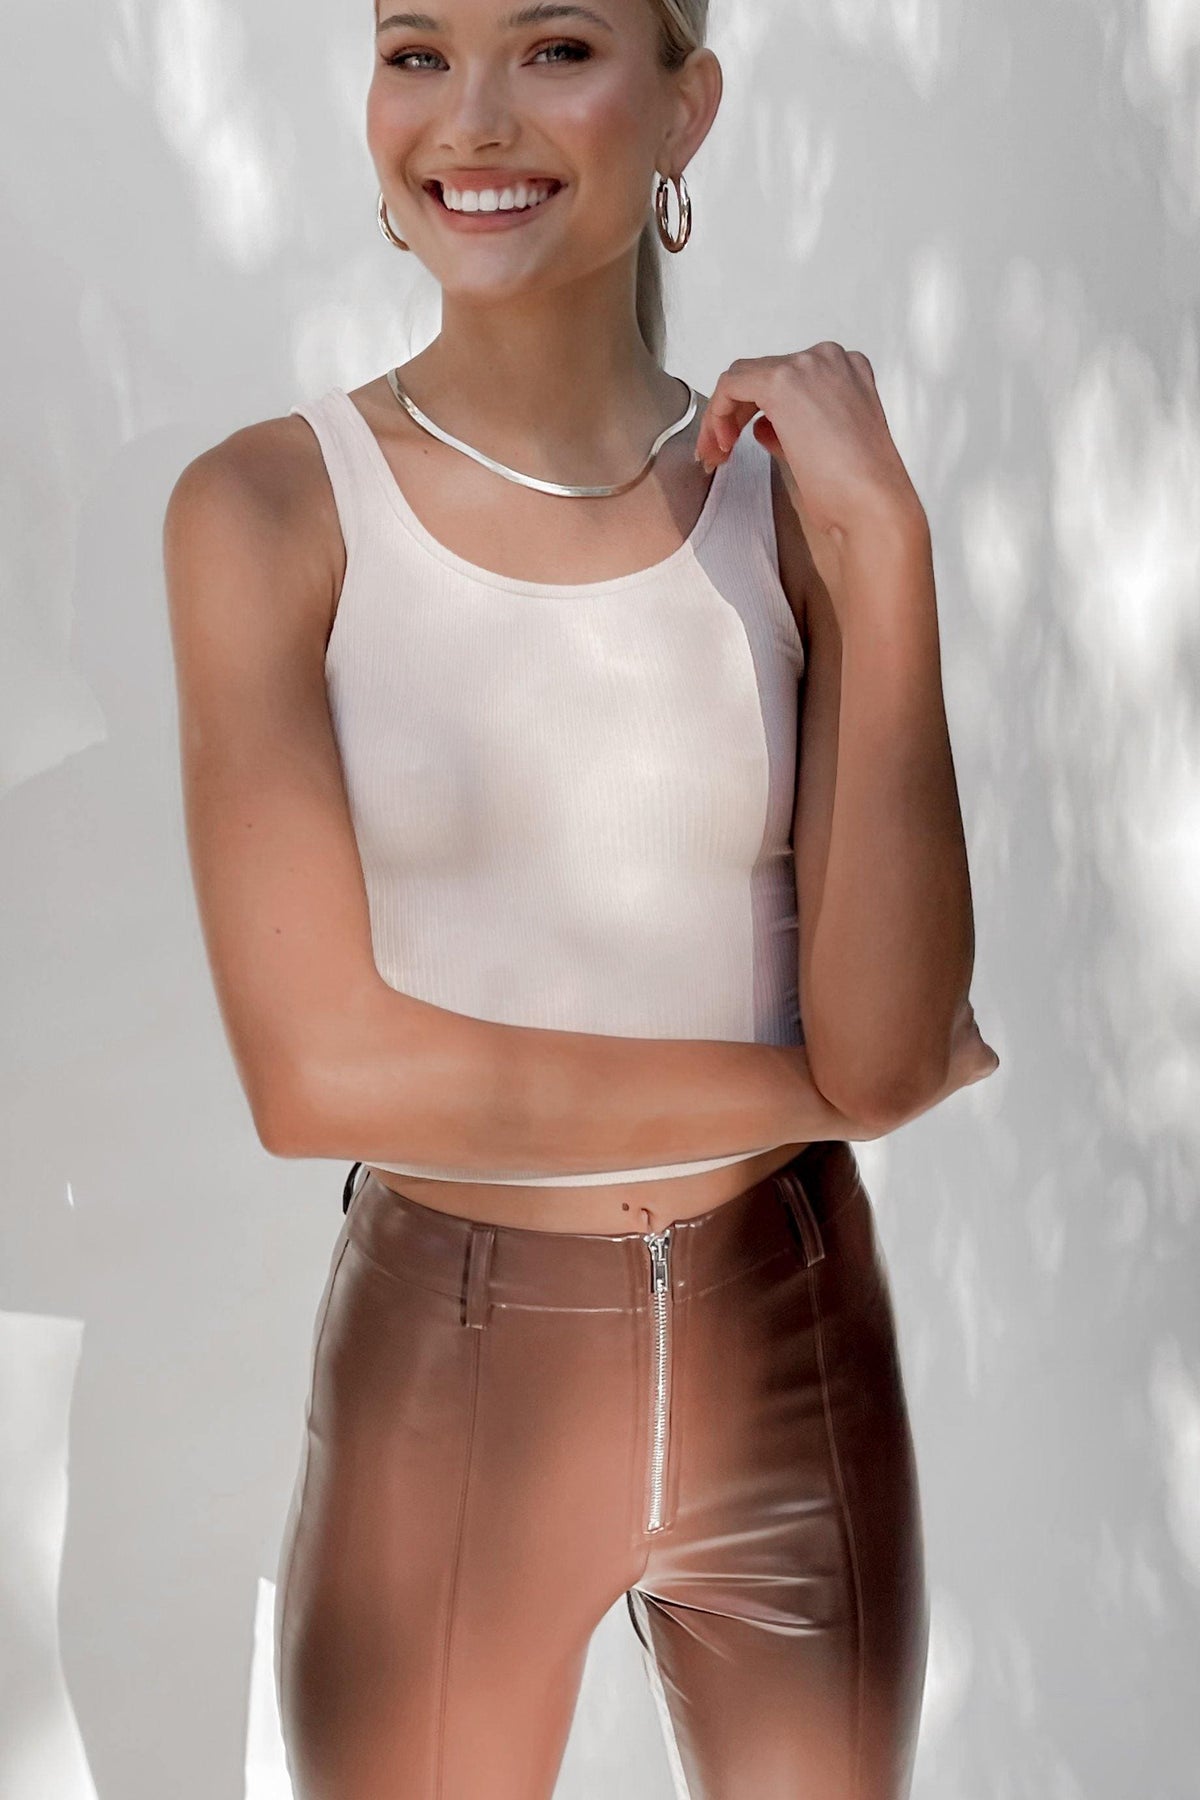 Otis Top, BEIGE, COTTON &amp; POLYESTER, COTTON AND POLYESTER, CROP TOPS, POLYESTER &amp; COTTON, POLYESTER AND COTTON, Sale, TOP, TOPS, Our New Otis Top Is Now Only $41.00 Exclusive At Mishkah, Our New Otis Top is now only $41.00-We Have The Latest Women&#39;s Tops @ Mishkah Online Fashion Boutique-MISHKAH